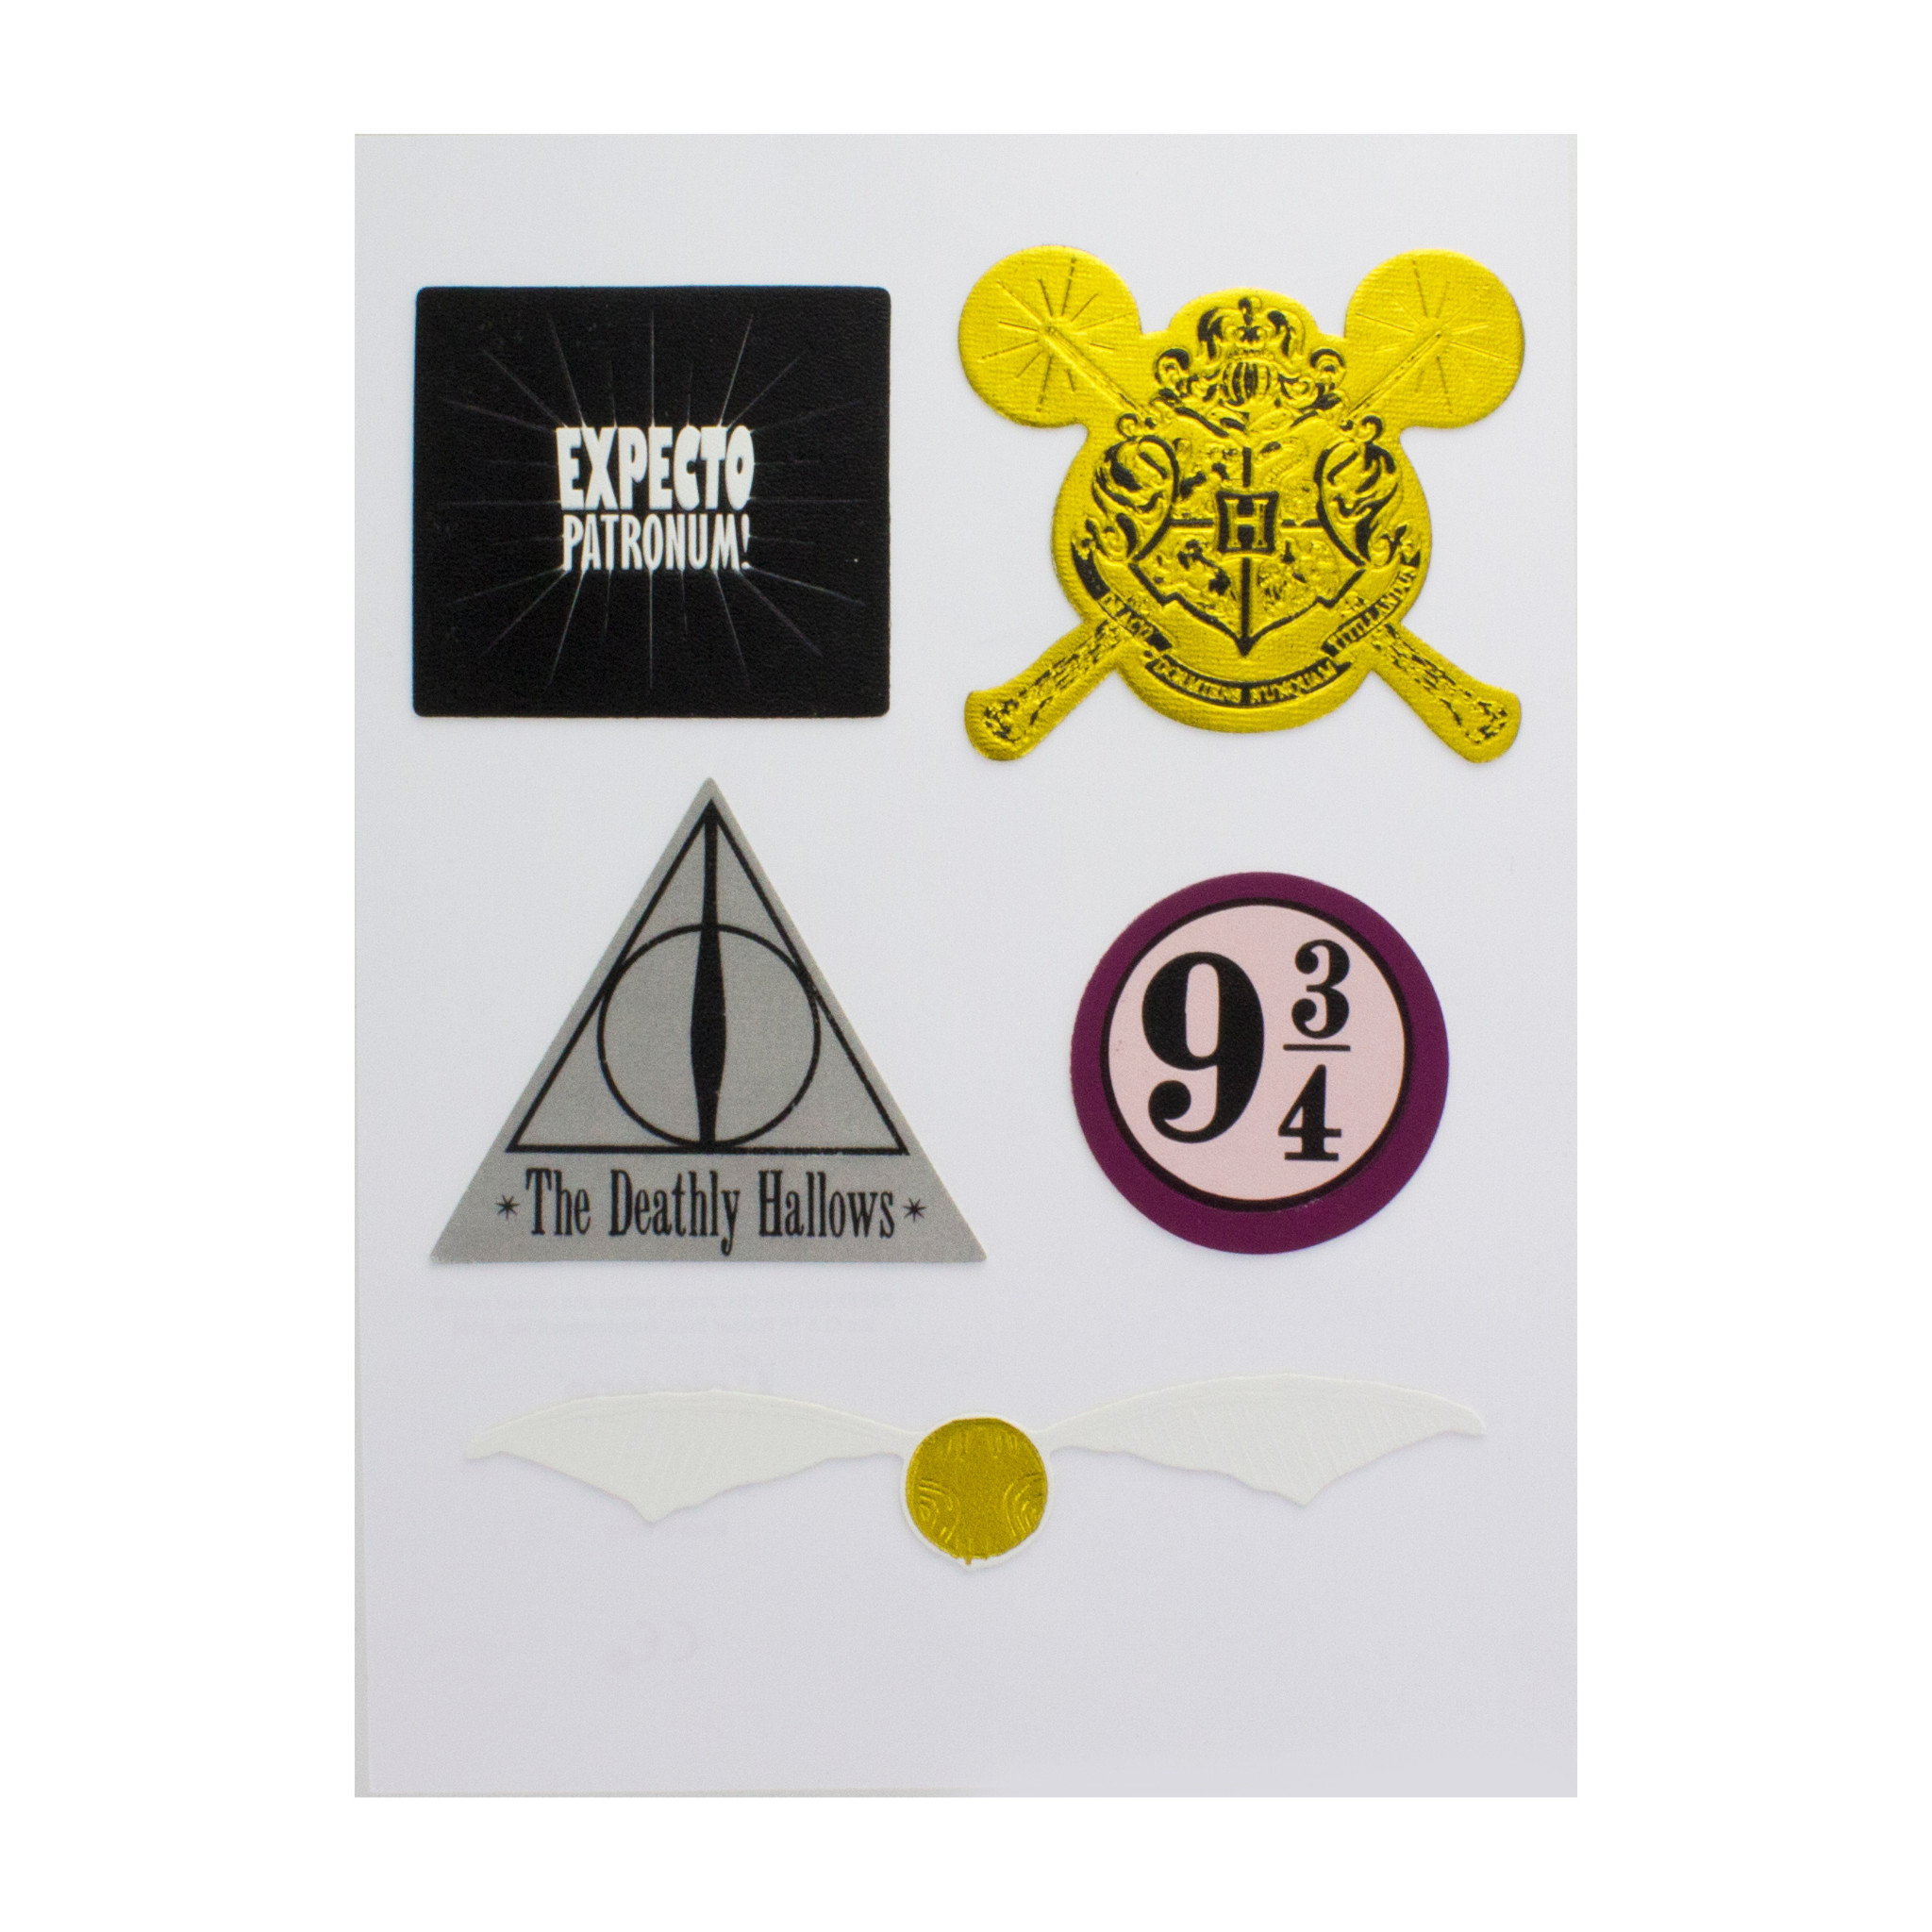 Harry Potter Accessories High Quality /"Leather Look/" Sticker Set aby